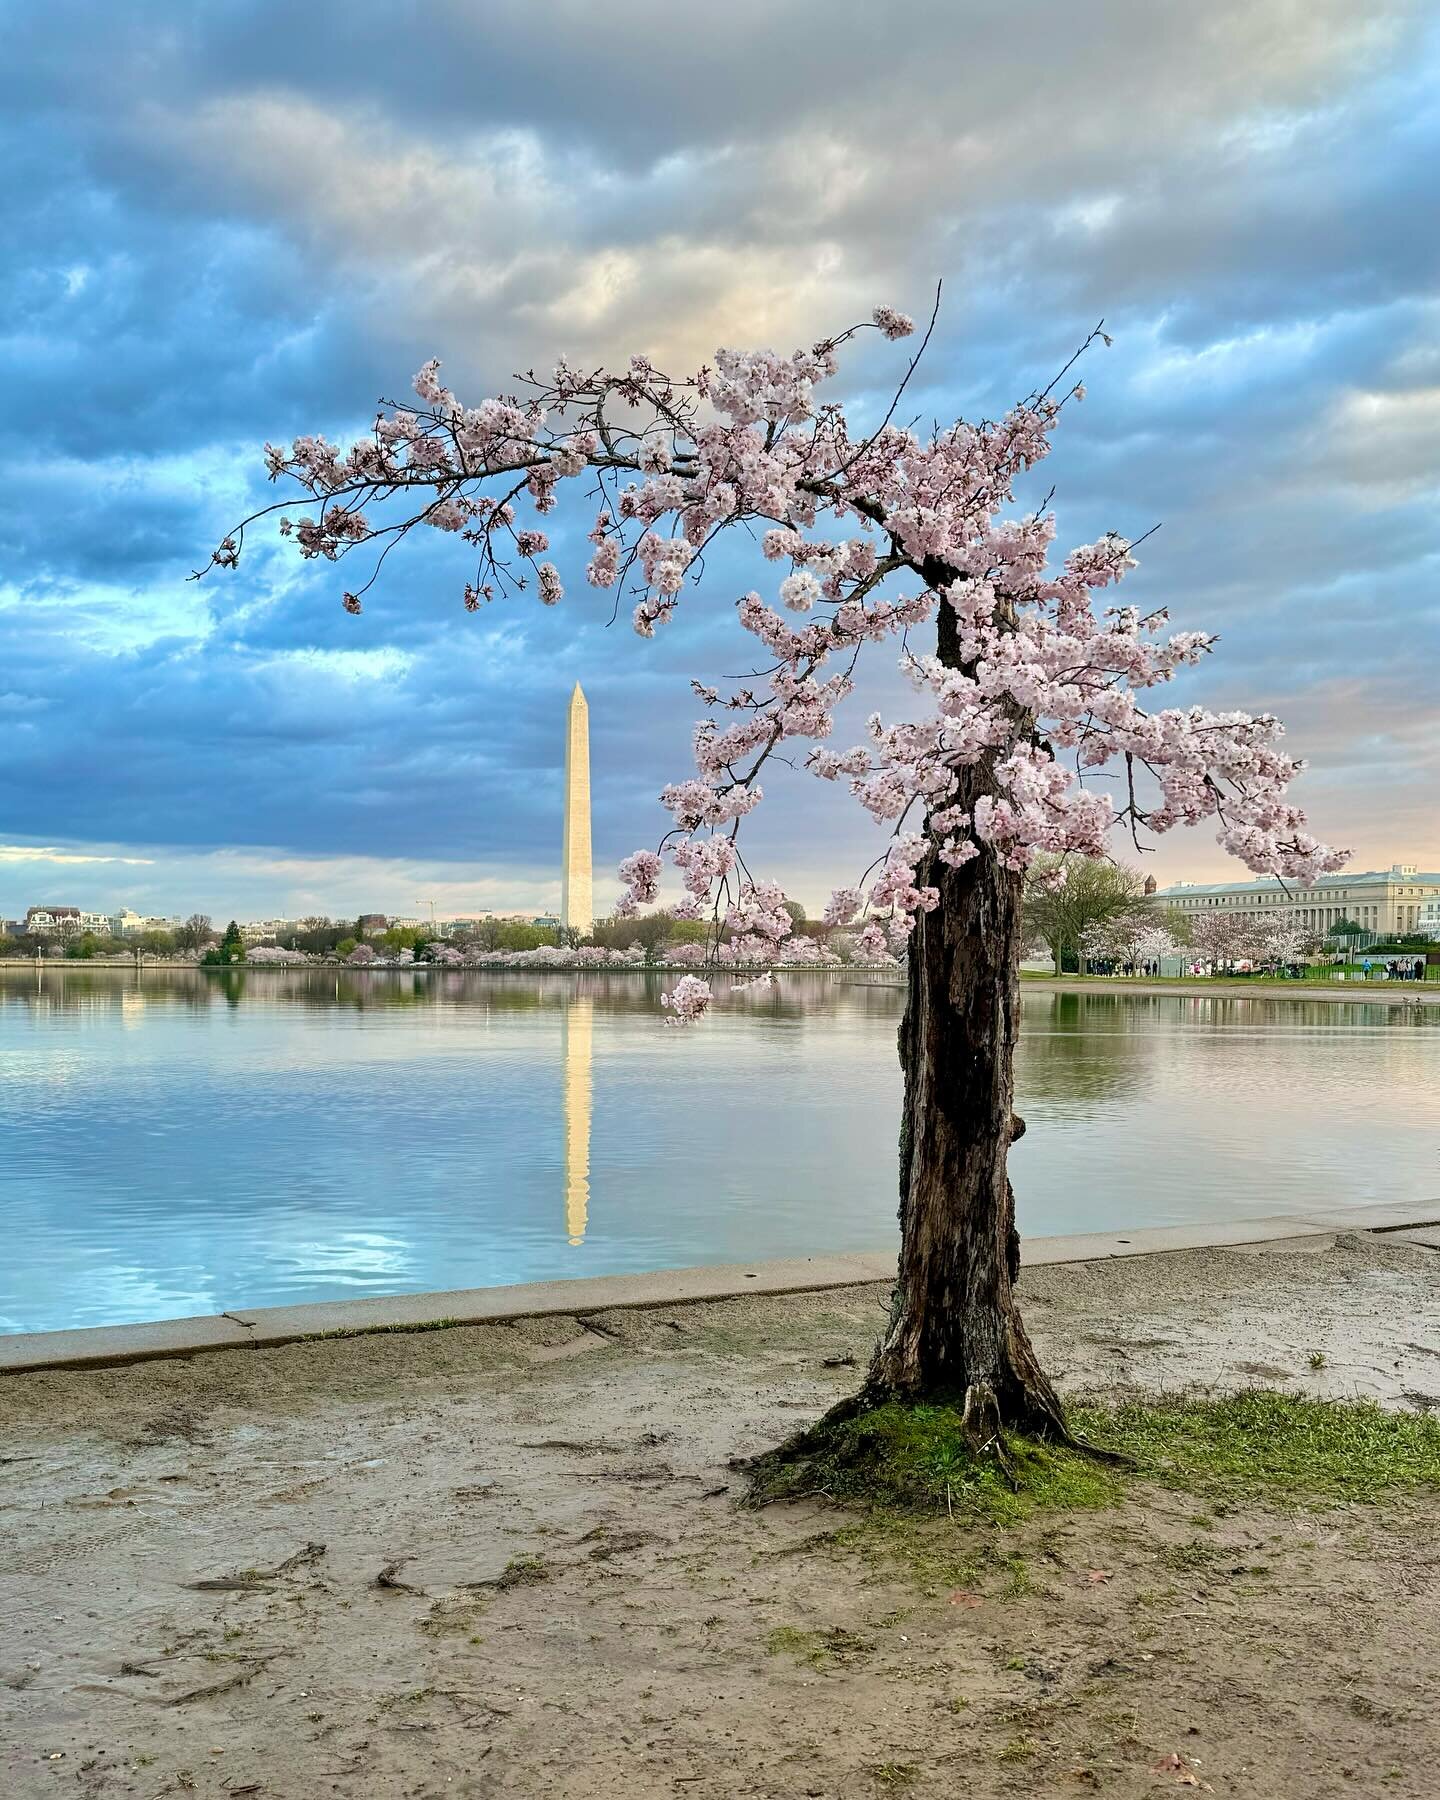 Stumpy&rsquo;s Last Spring 🌸

This morning I woke up before sunrise to beat the crowds to enjoy the cherry blossoms. My primary objective was to see Stumpy, one last time. 

Later this Spring Stumpy, along with 140 of his nearby neighbors, will be r